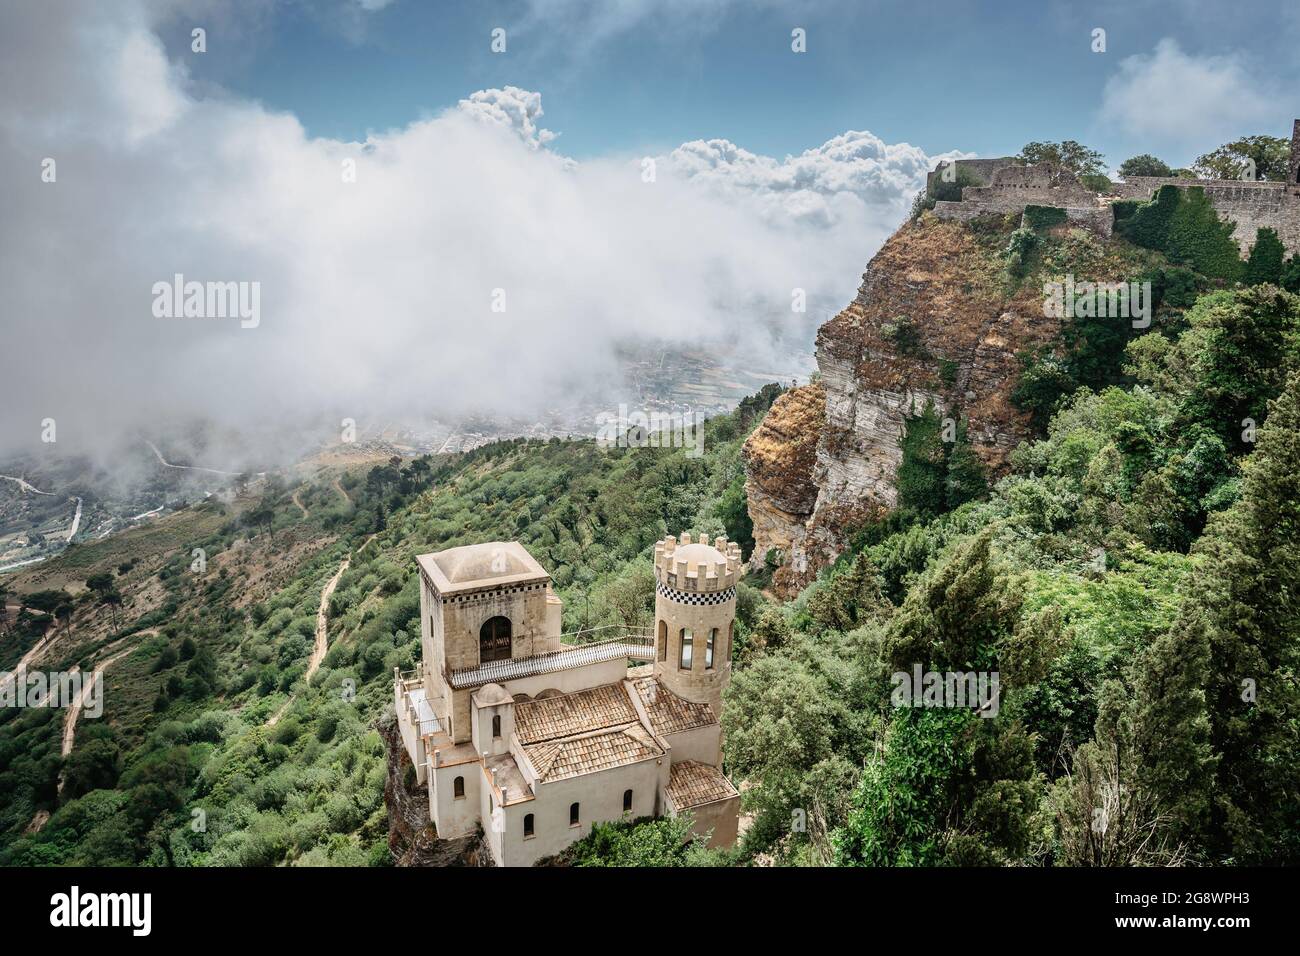 Erice,Sicily,Italy.Historic town on the top of mountains overlooking beautiful lush countryside.View of Venus Castle,Castello di Venere, in clouds. Stock Photo